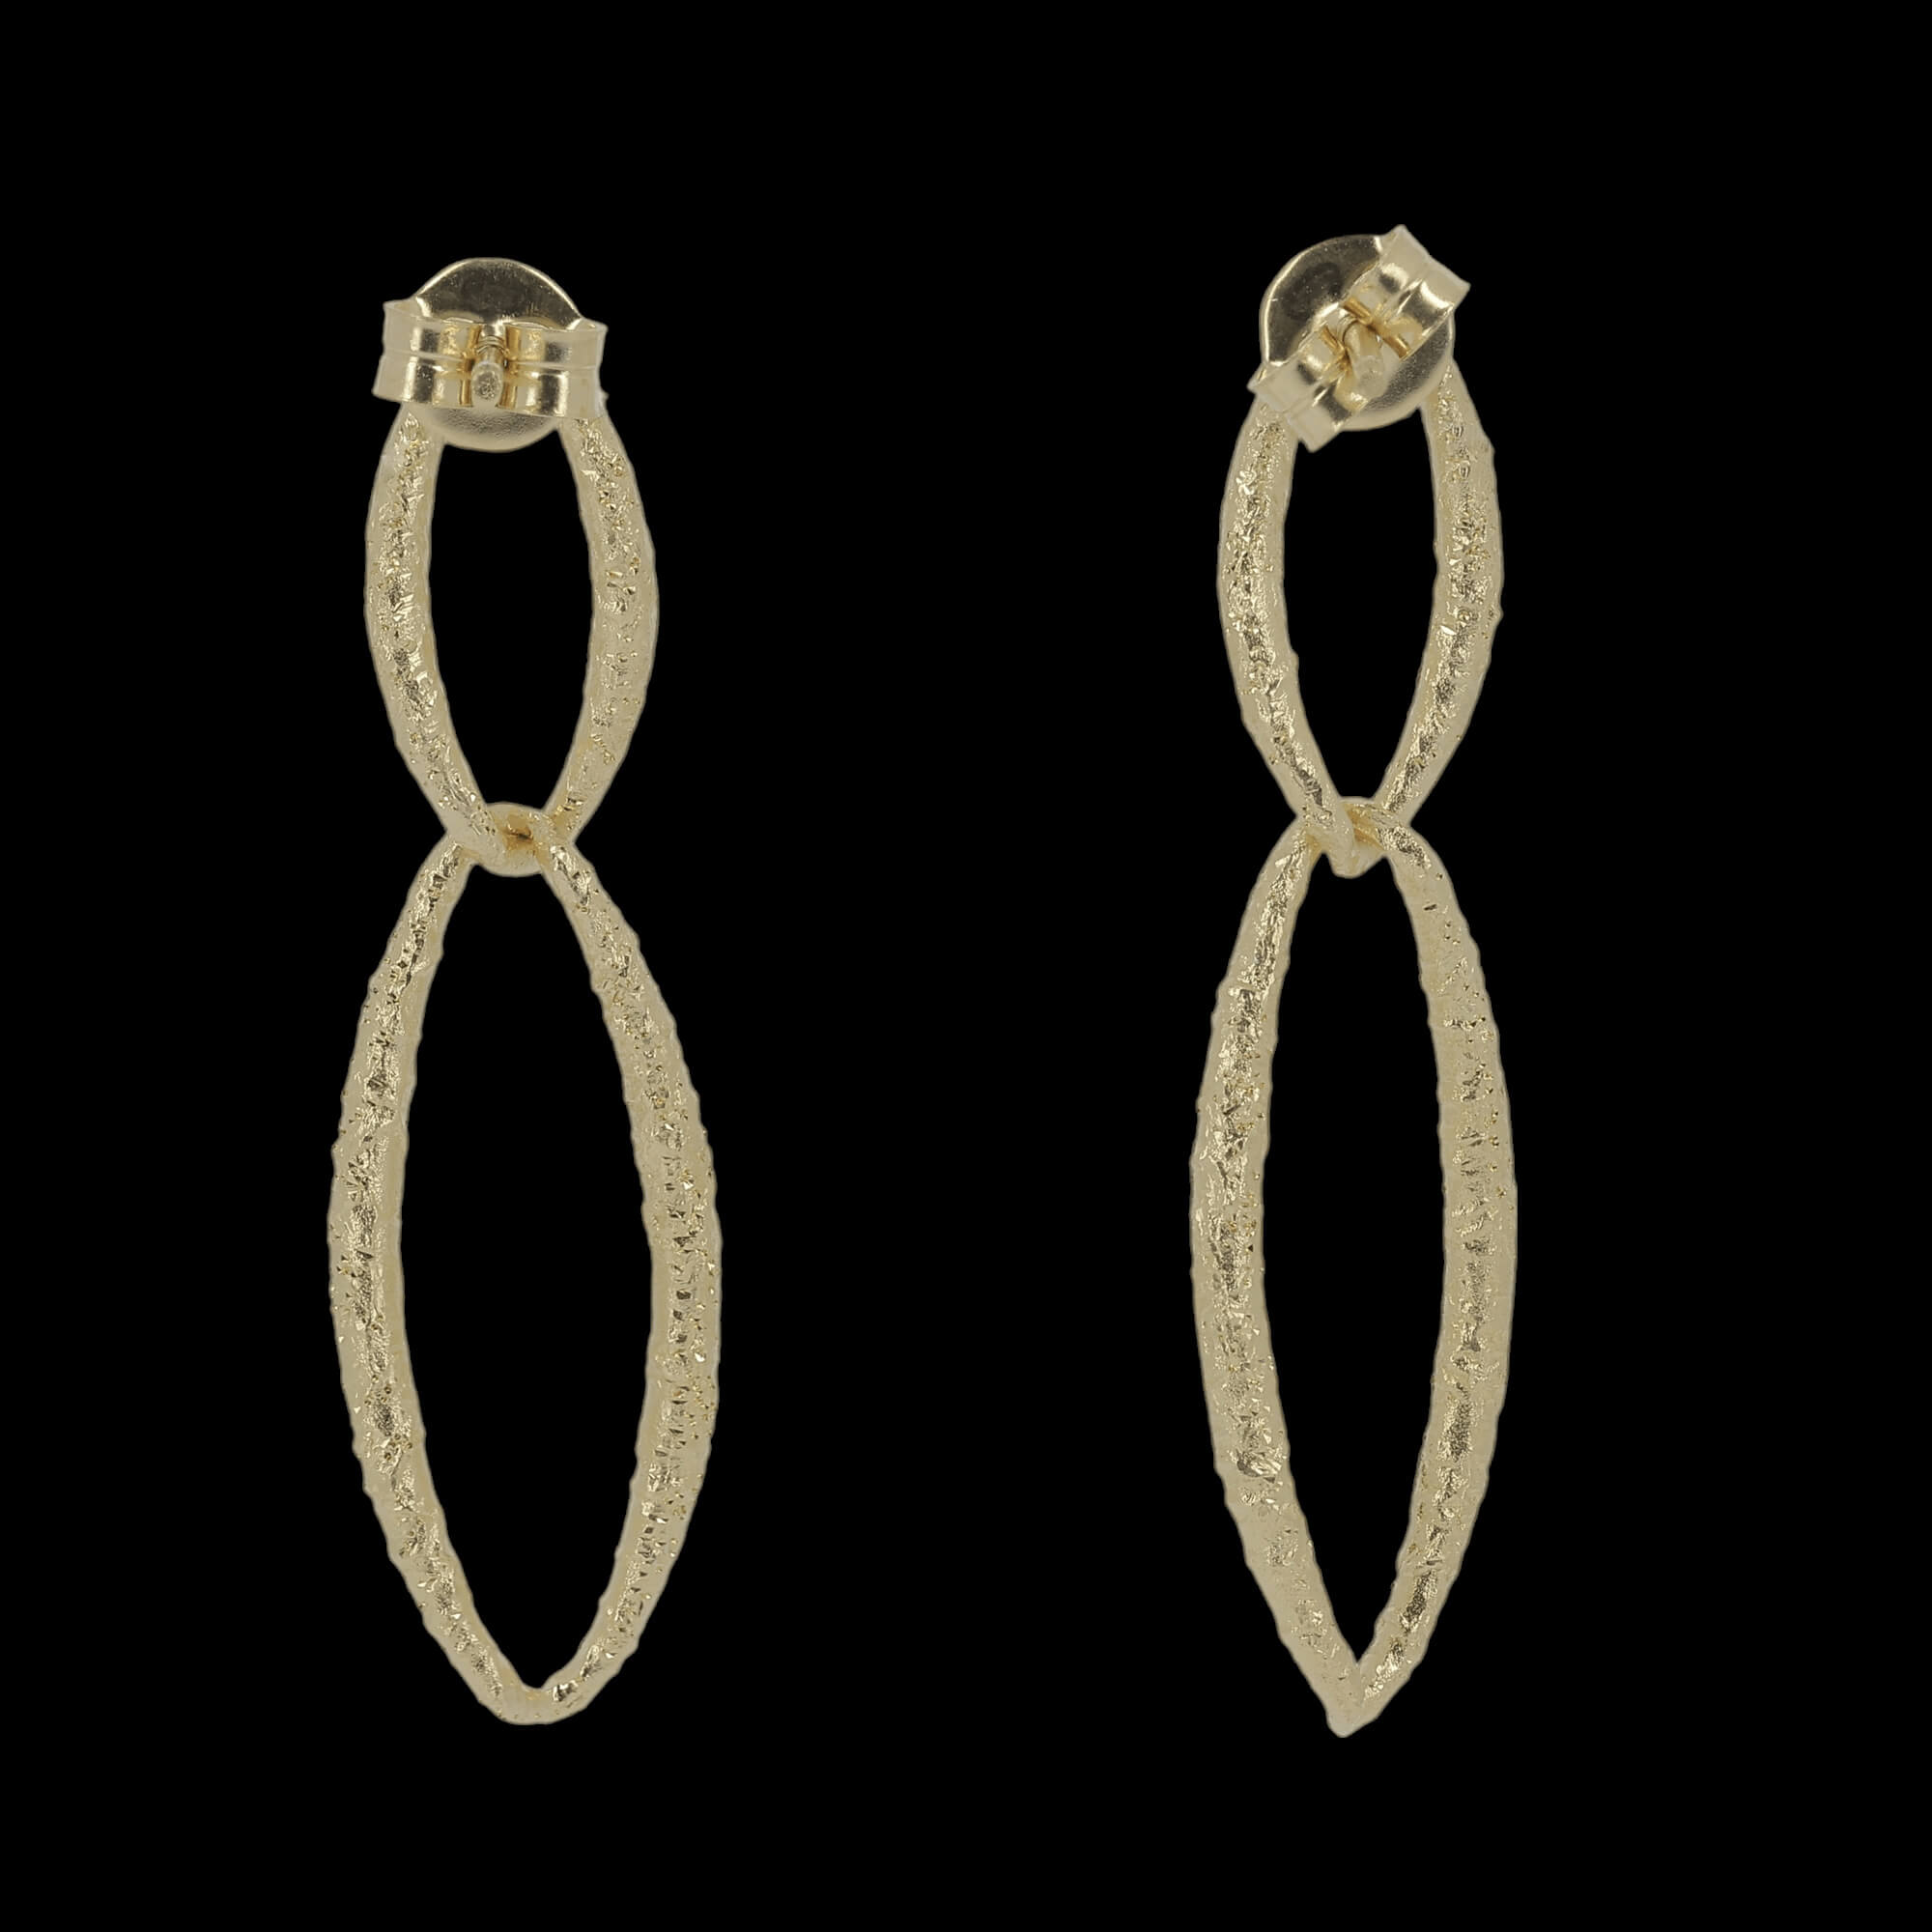 Gilded and beautiful switching earrings